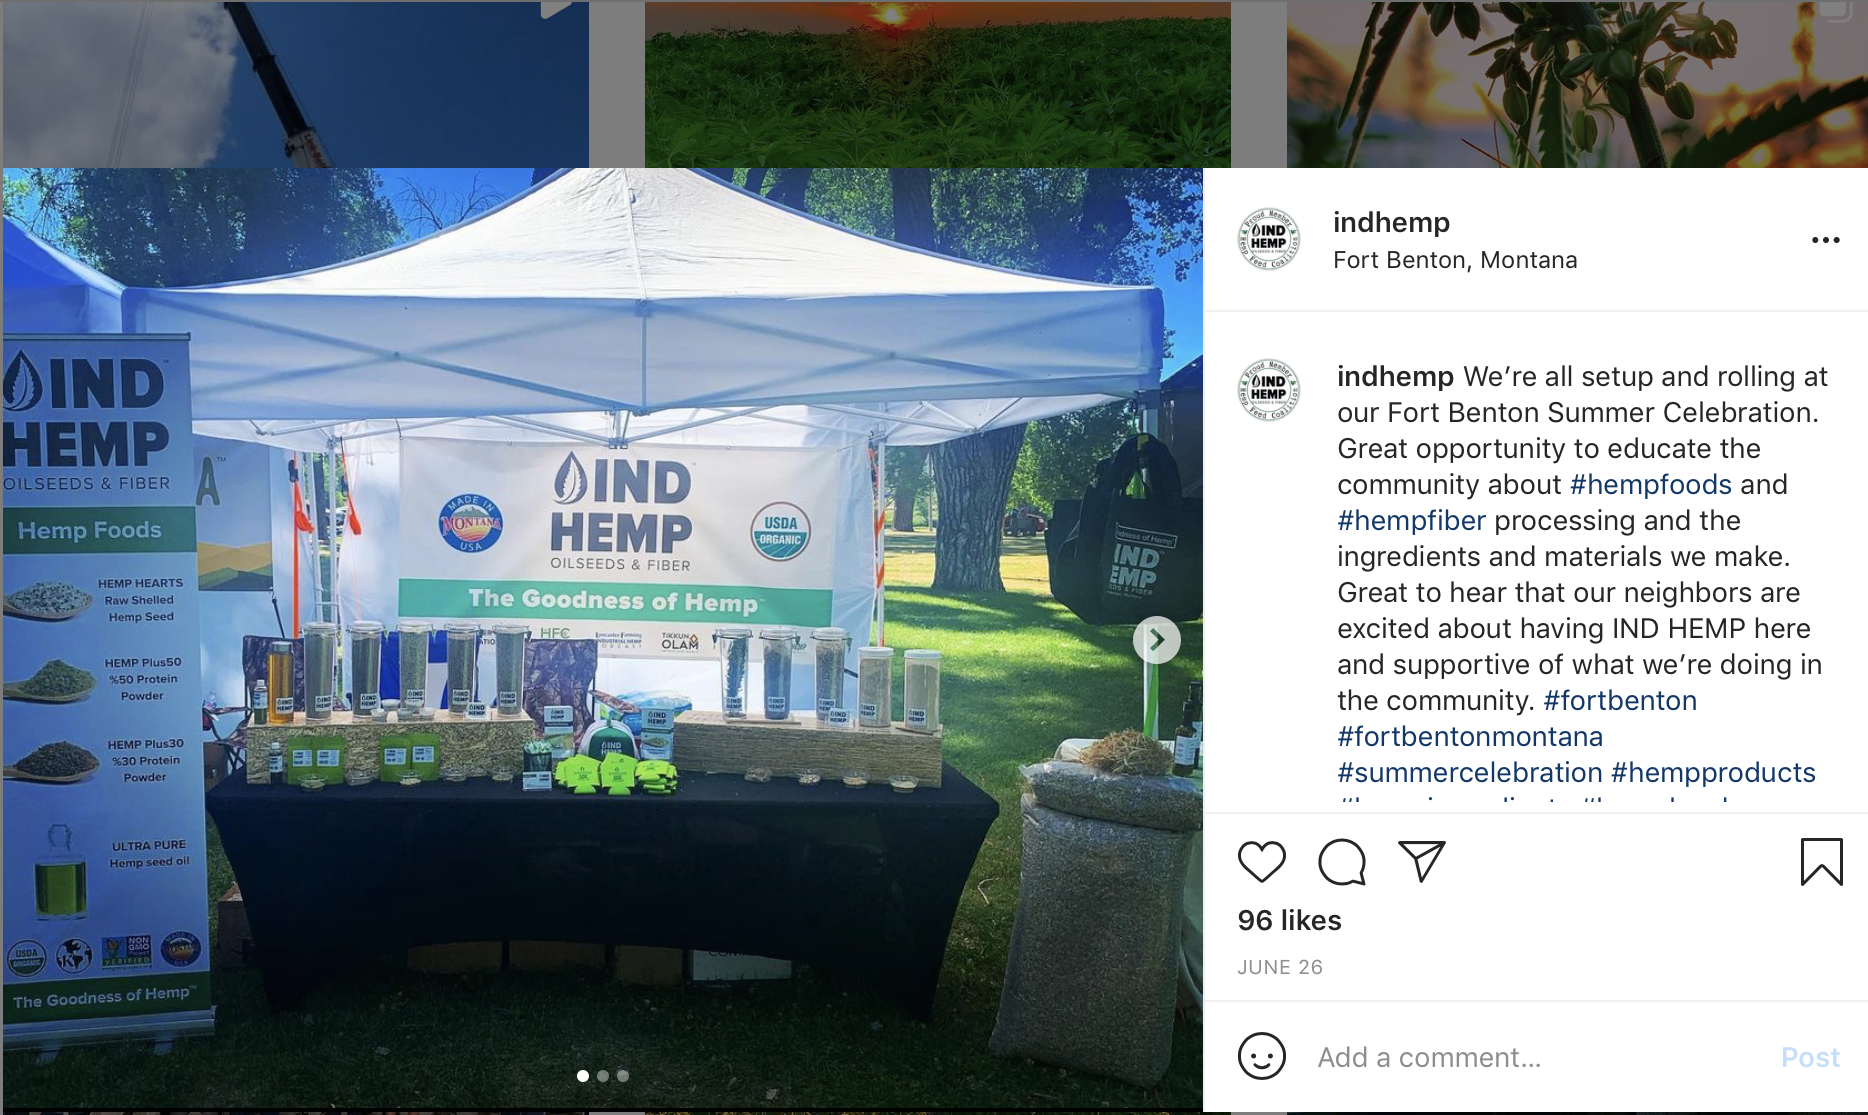 IND HEMP’s booth at the 2021 Summer Celebration.